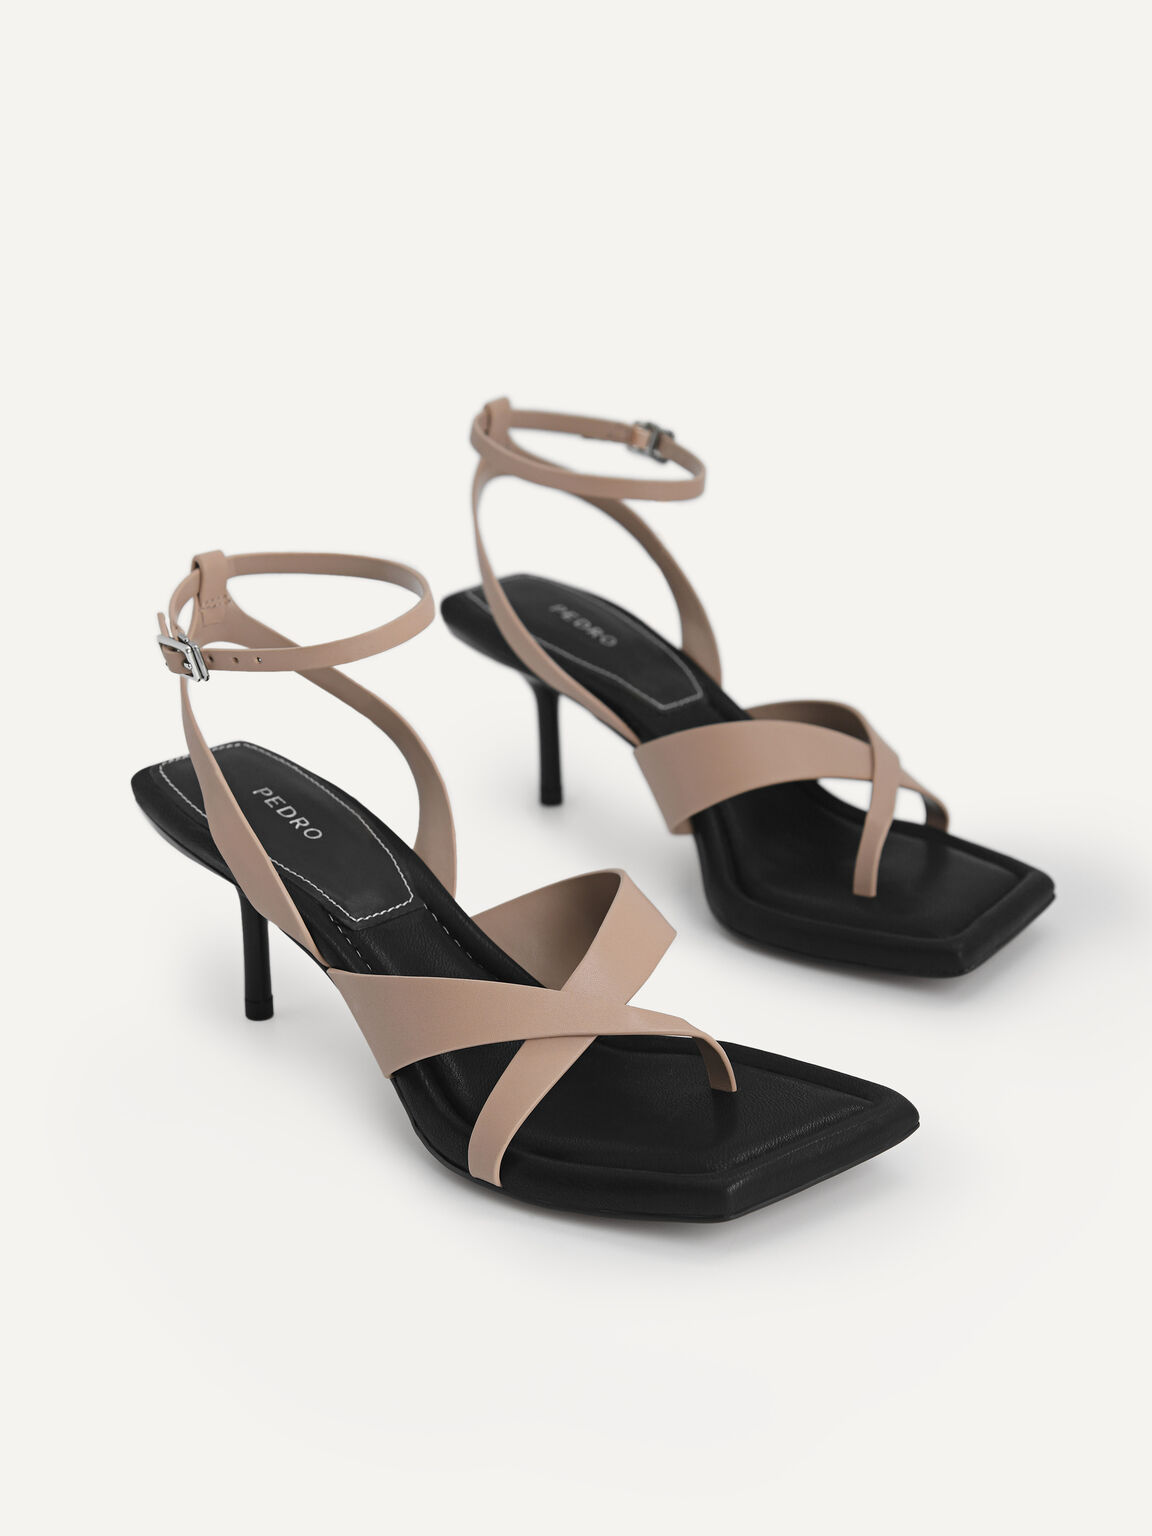 Strappy Square-Toe Heeled Sandals, Taupe, hi-res